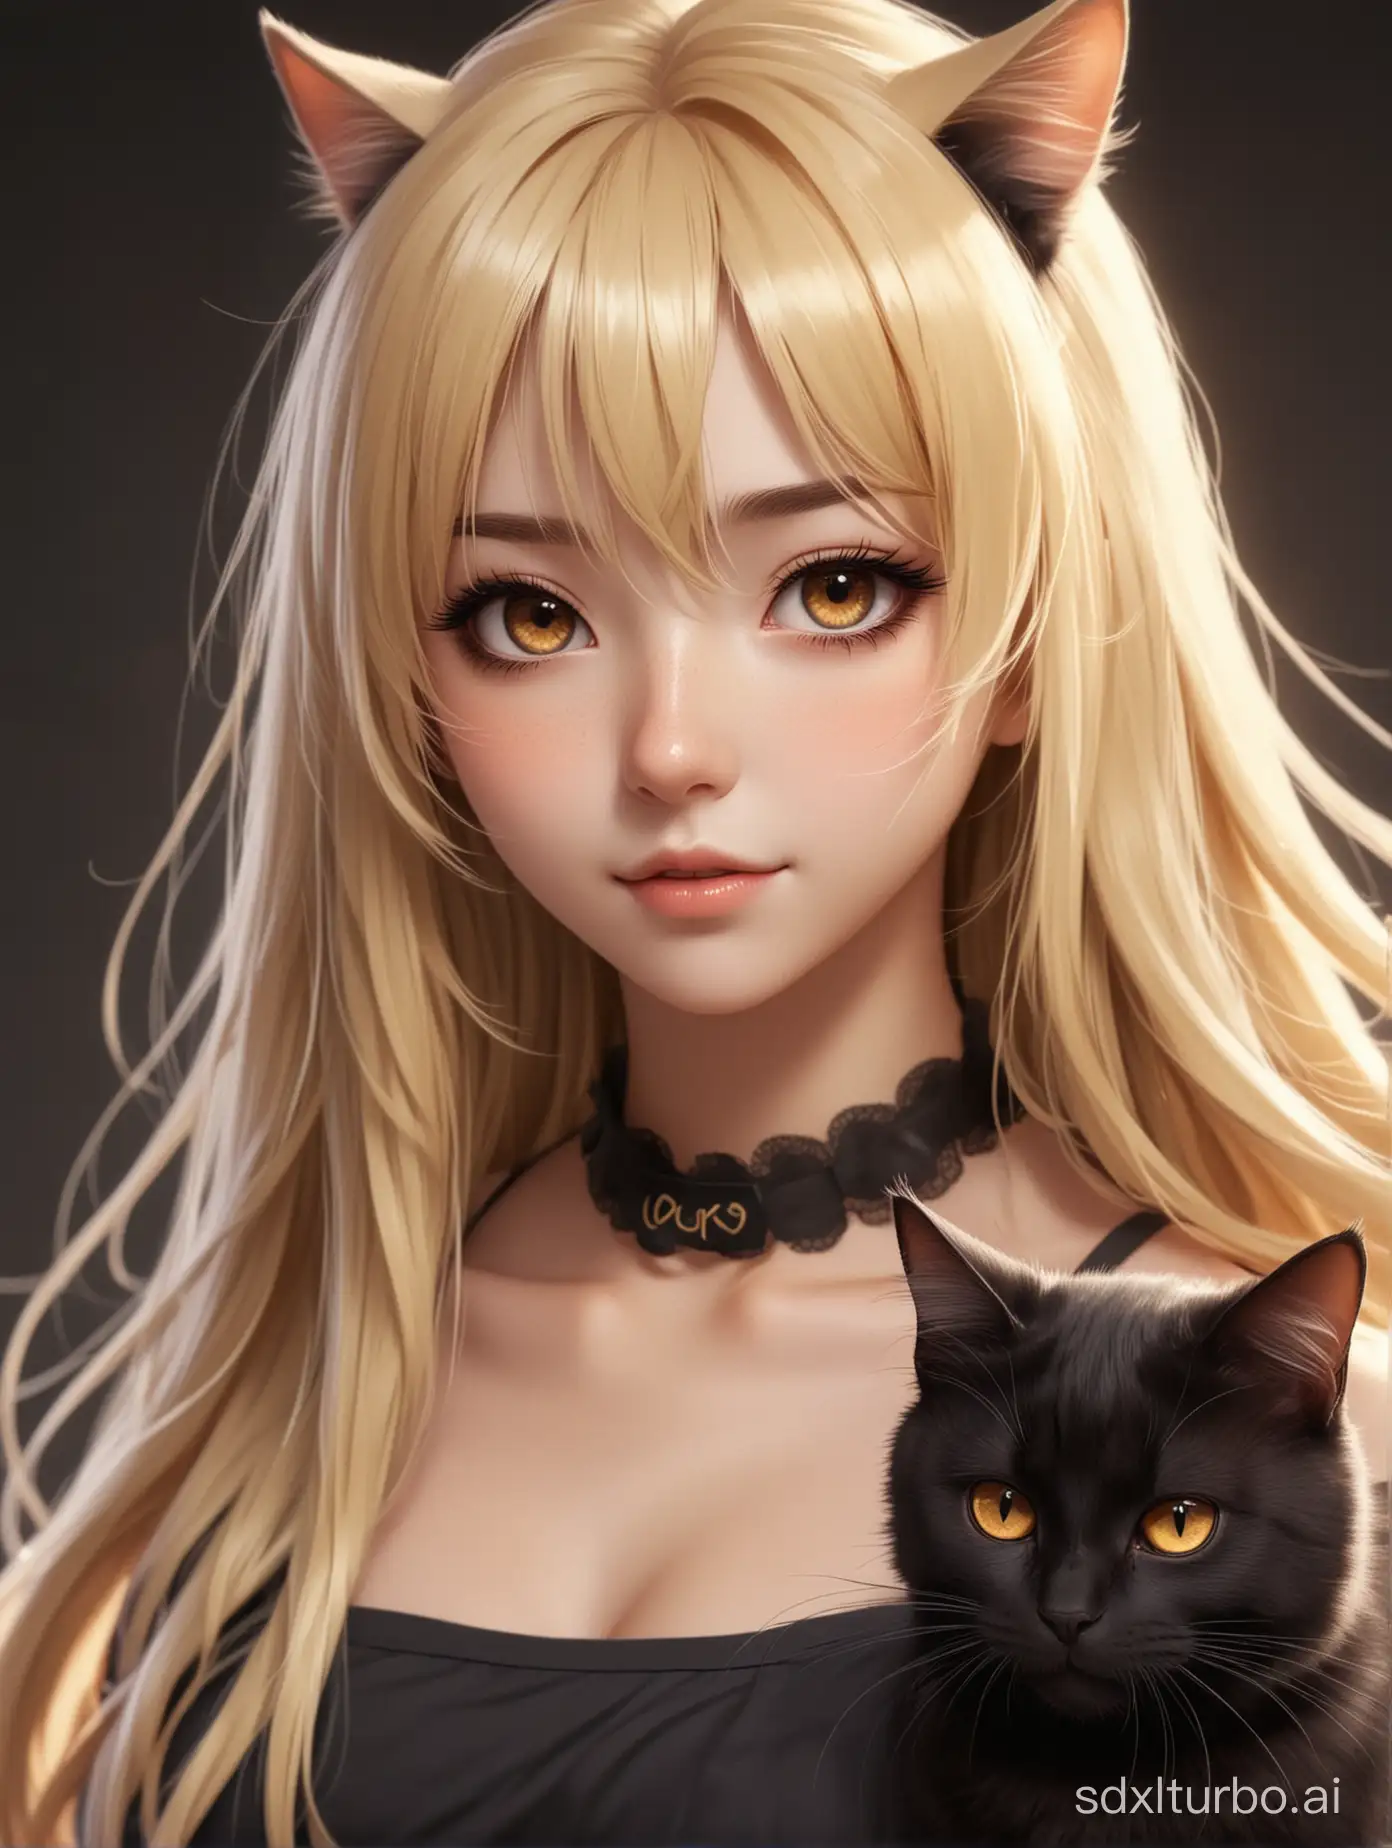 Anime girl with blond long hair, brown eyes and with black cat